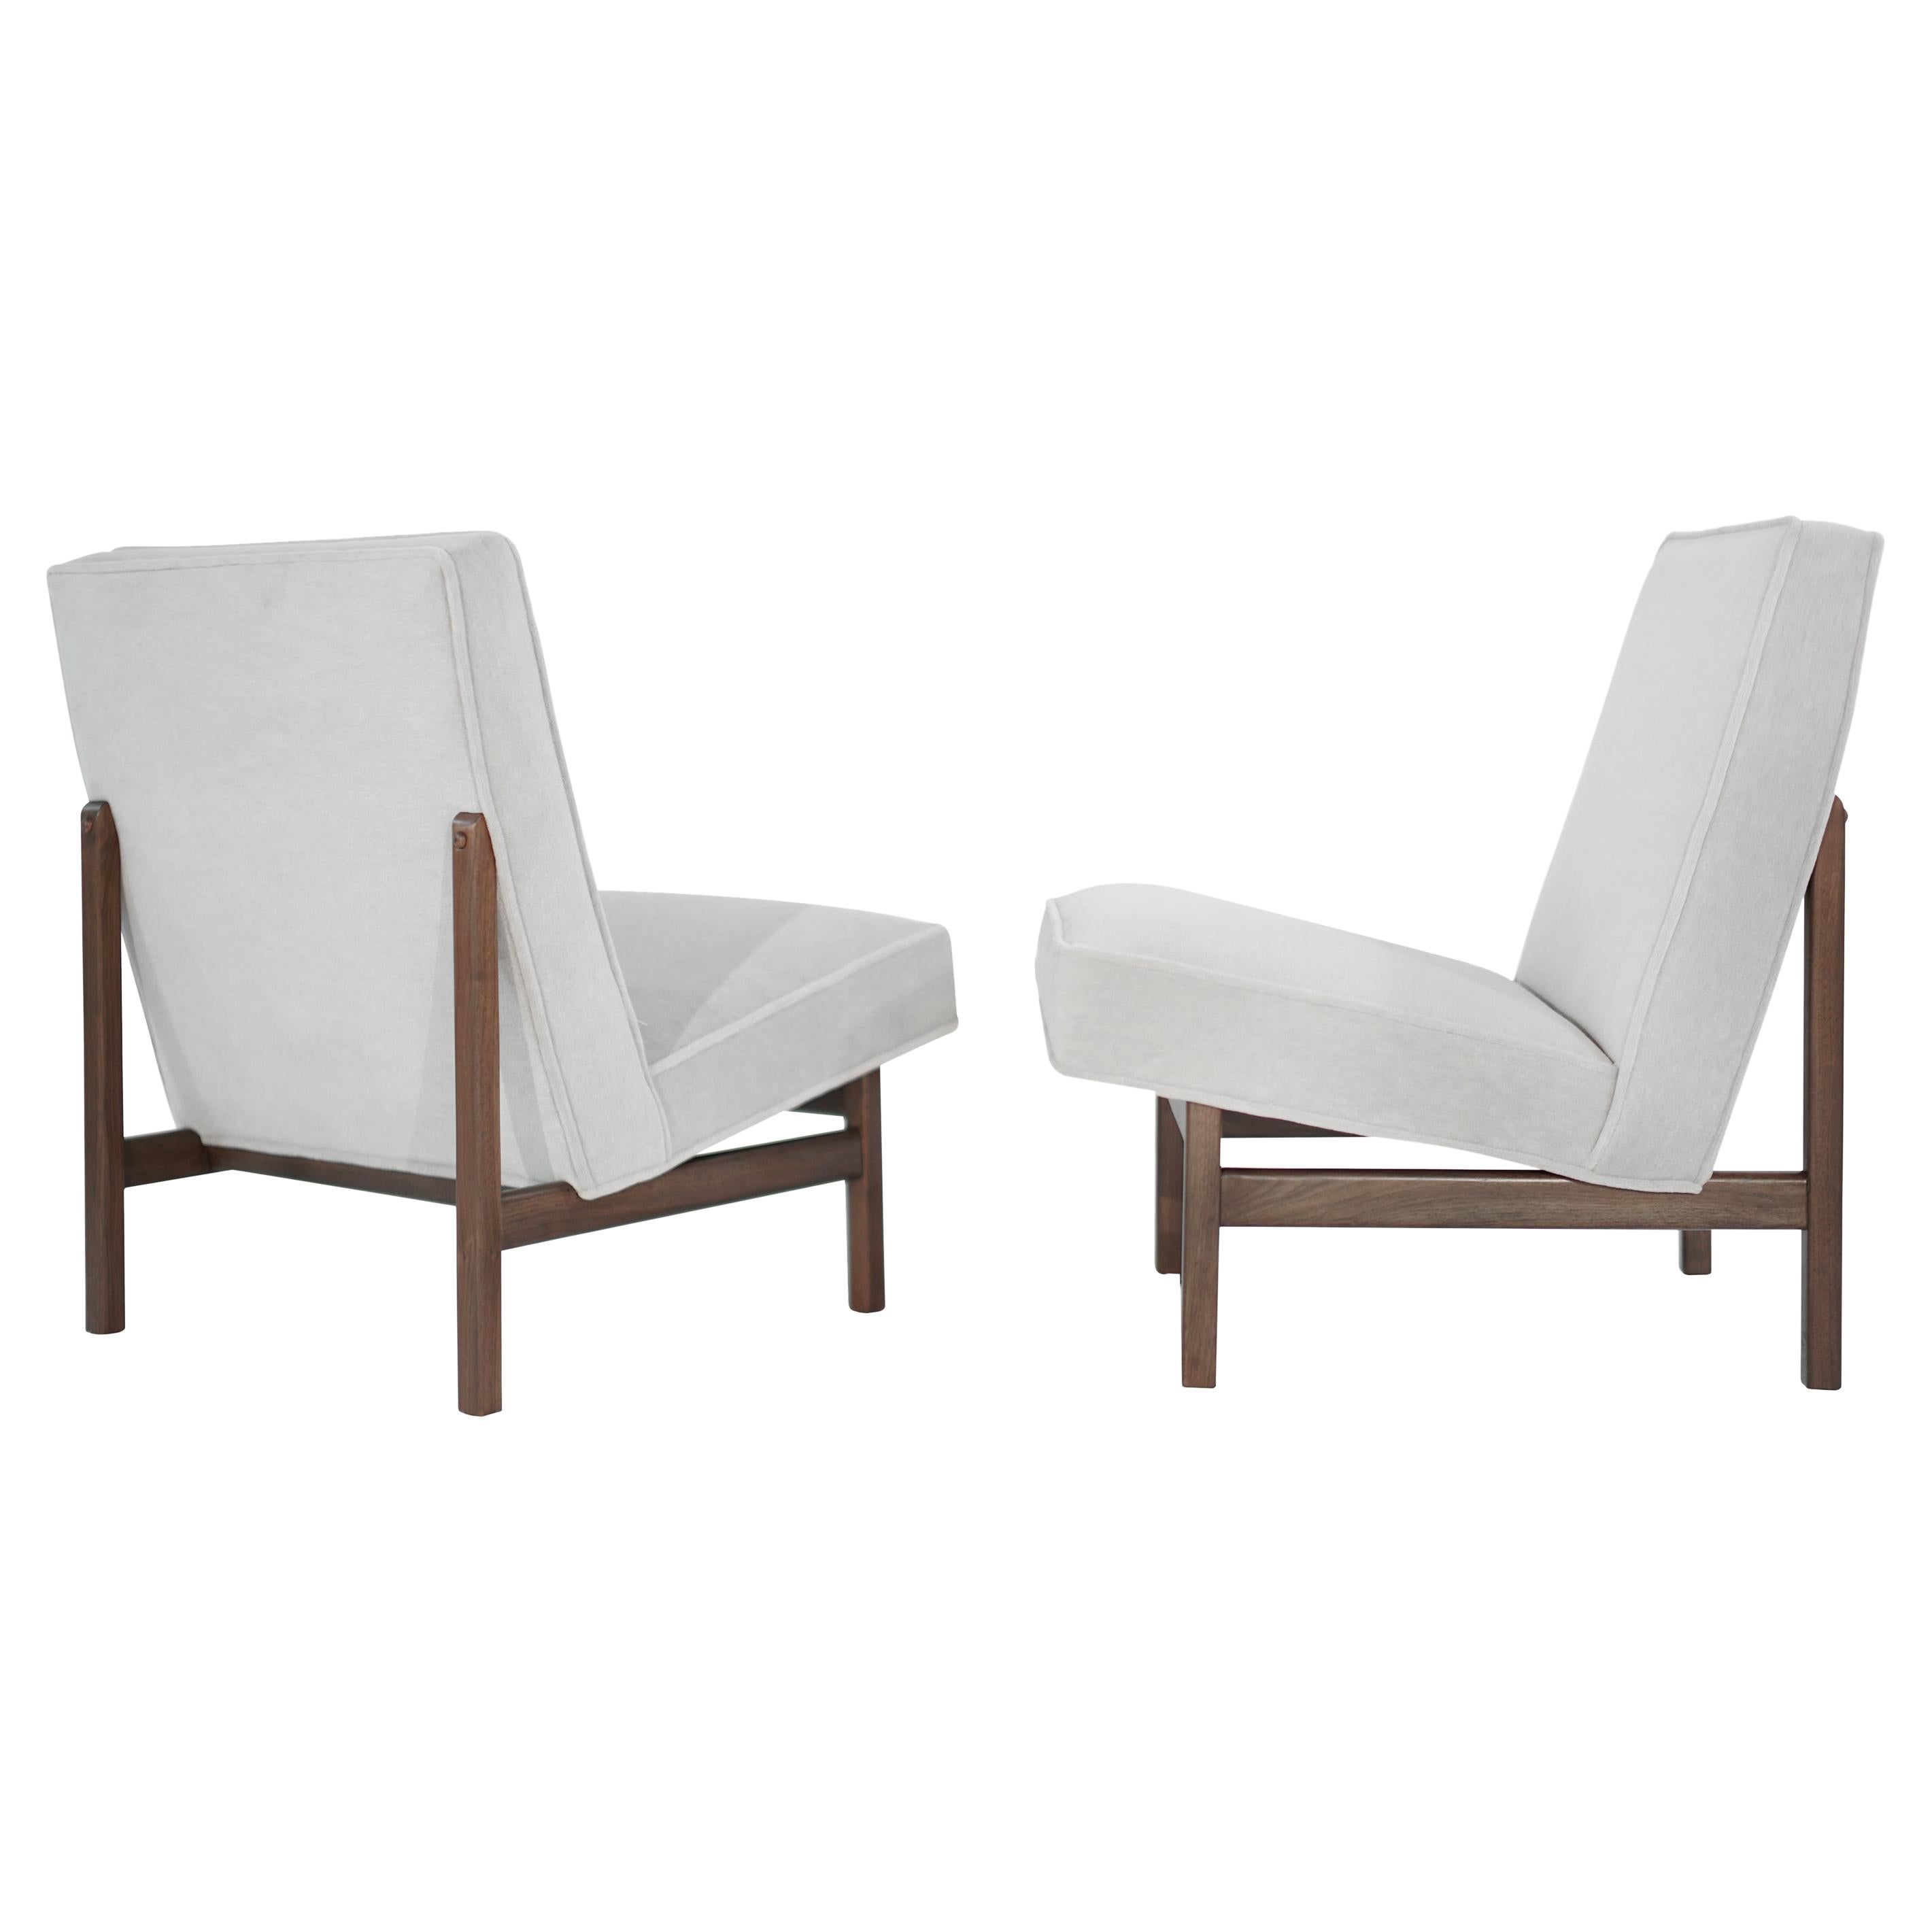 Pair of Slipper Chairs in Alpaca Velvet by Florence Knoll